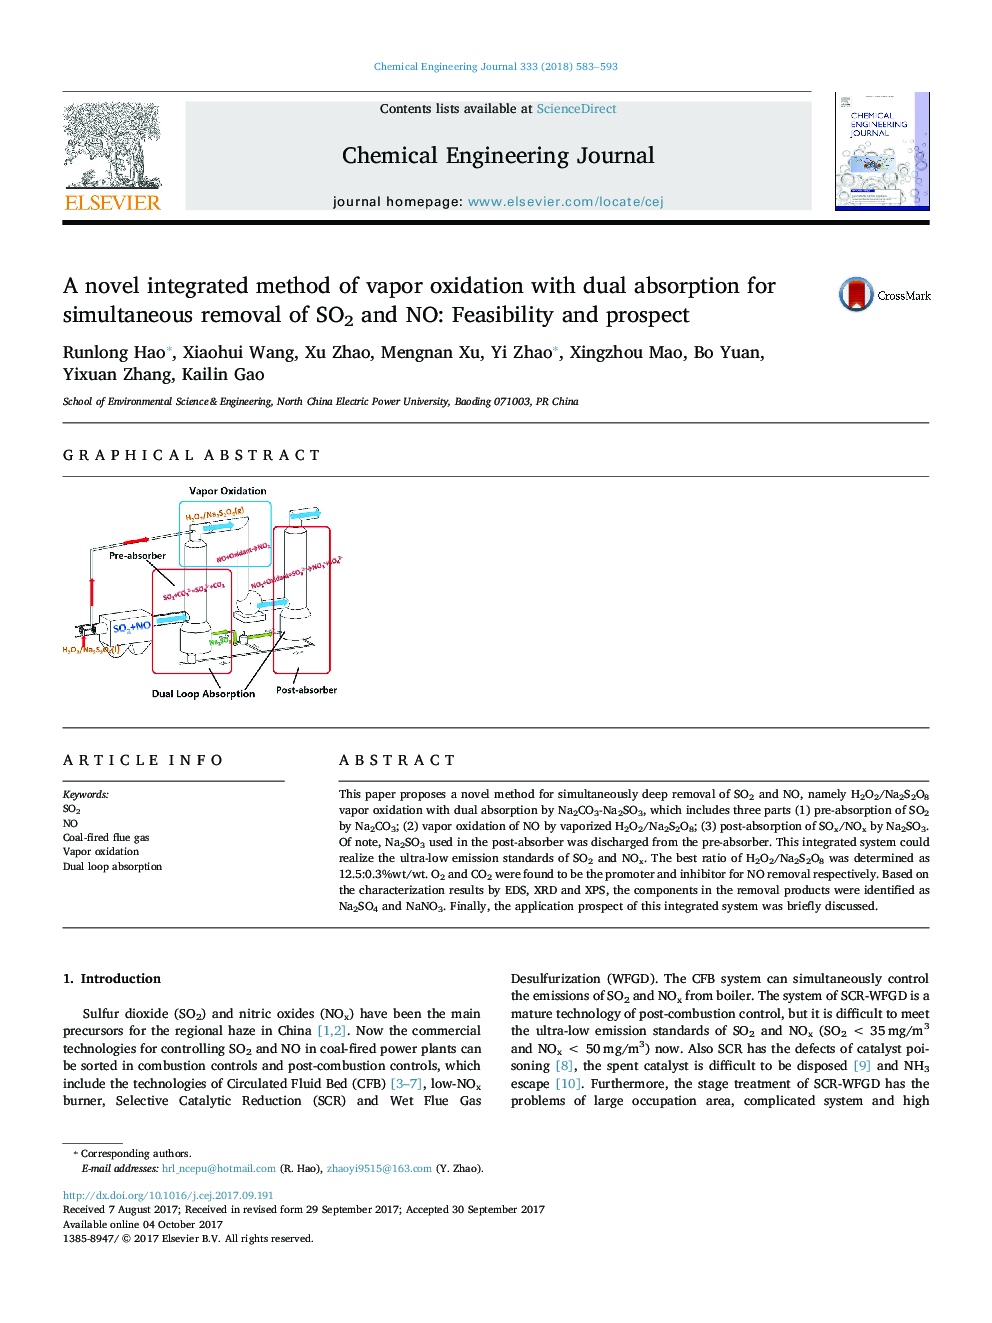 A novel integrated method of vapor oxidation with dual absorption for simultaneous removal of SO2 and NO: Feasibility and prospect